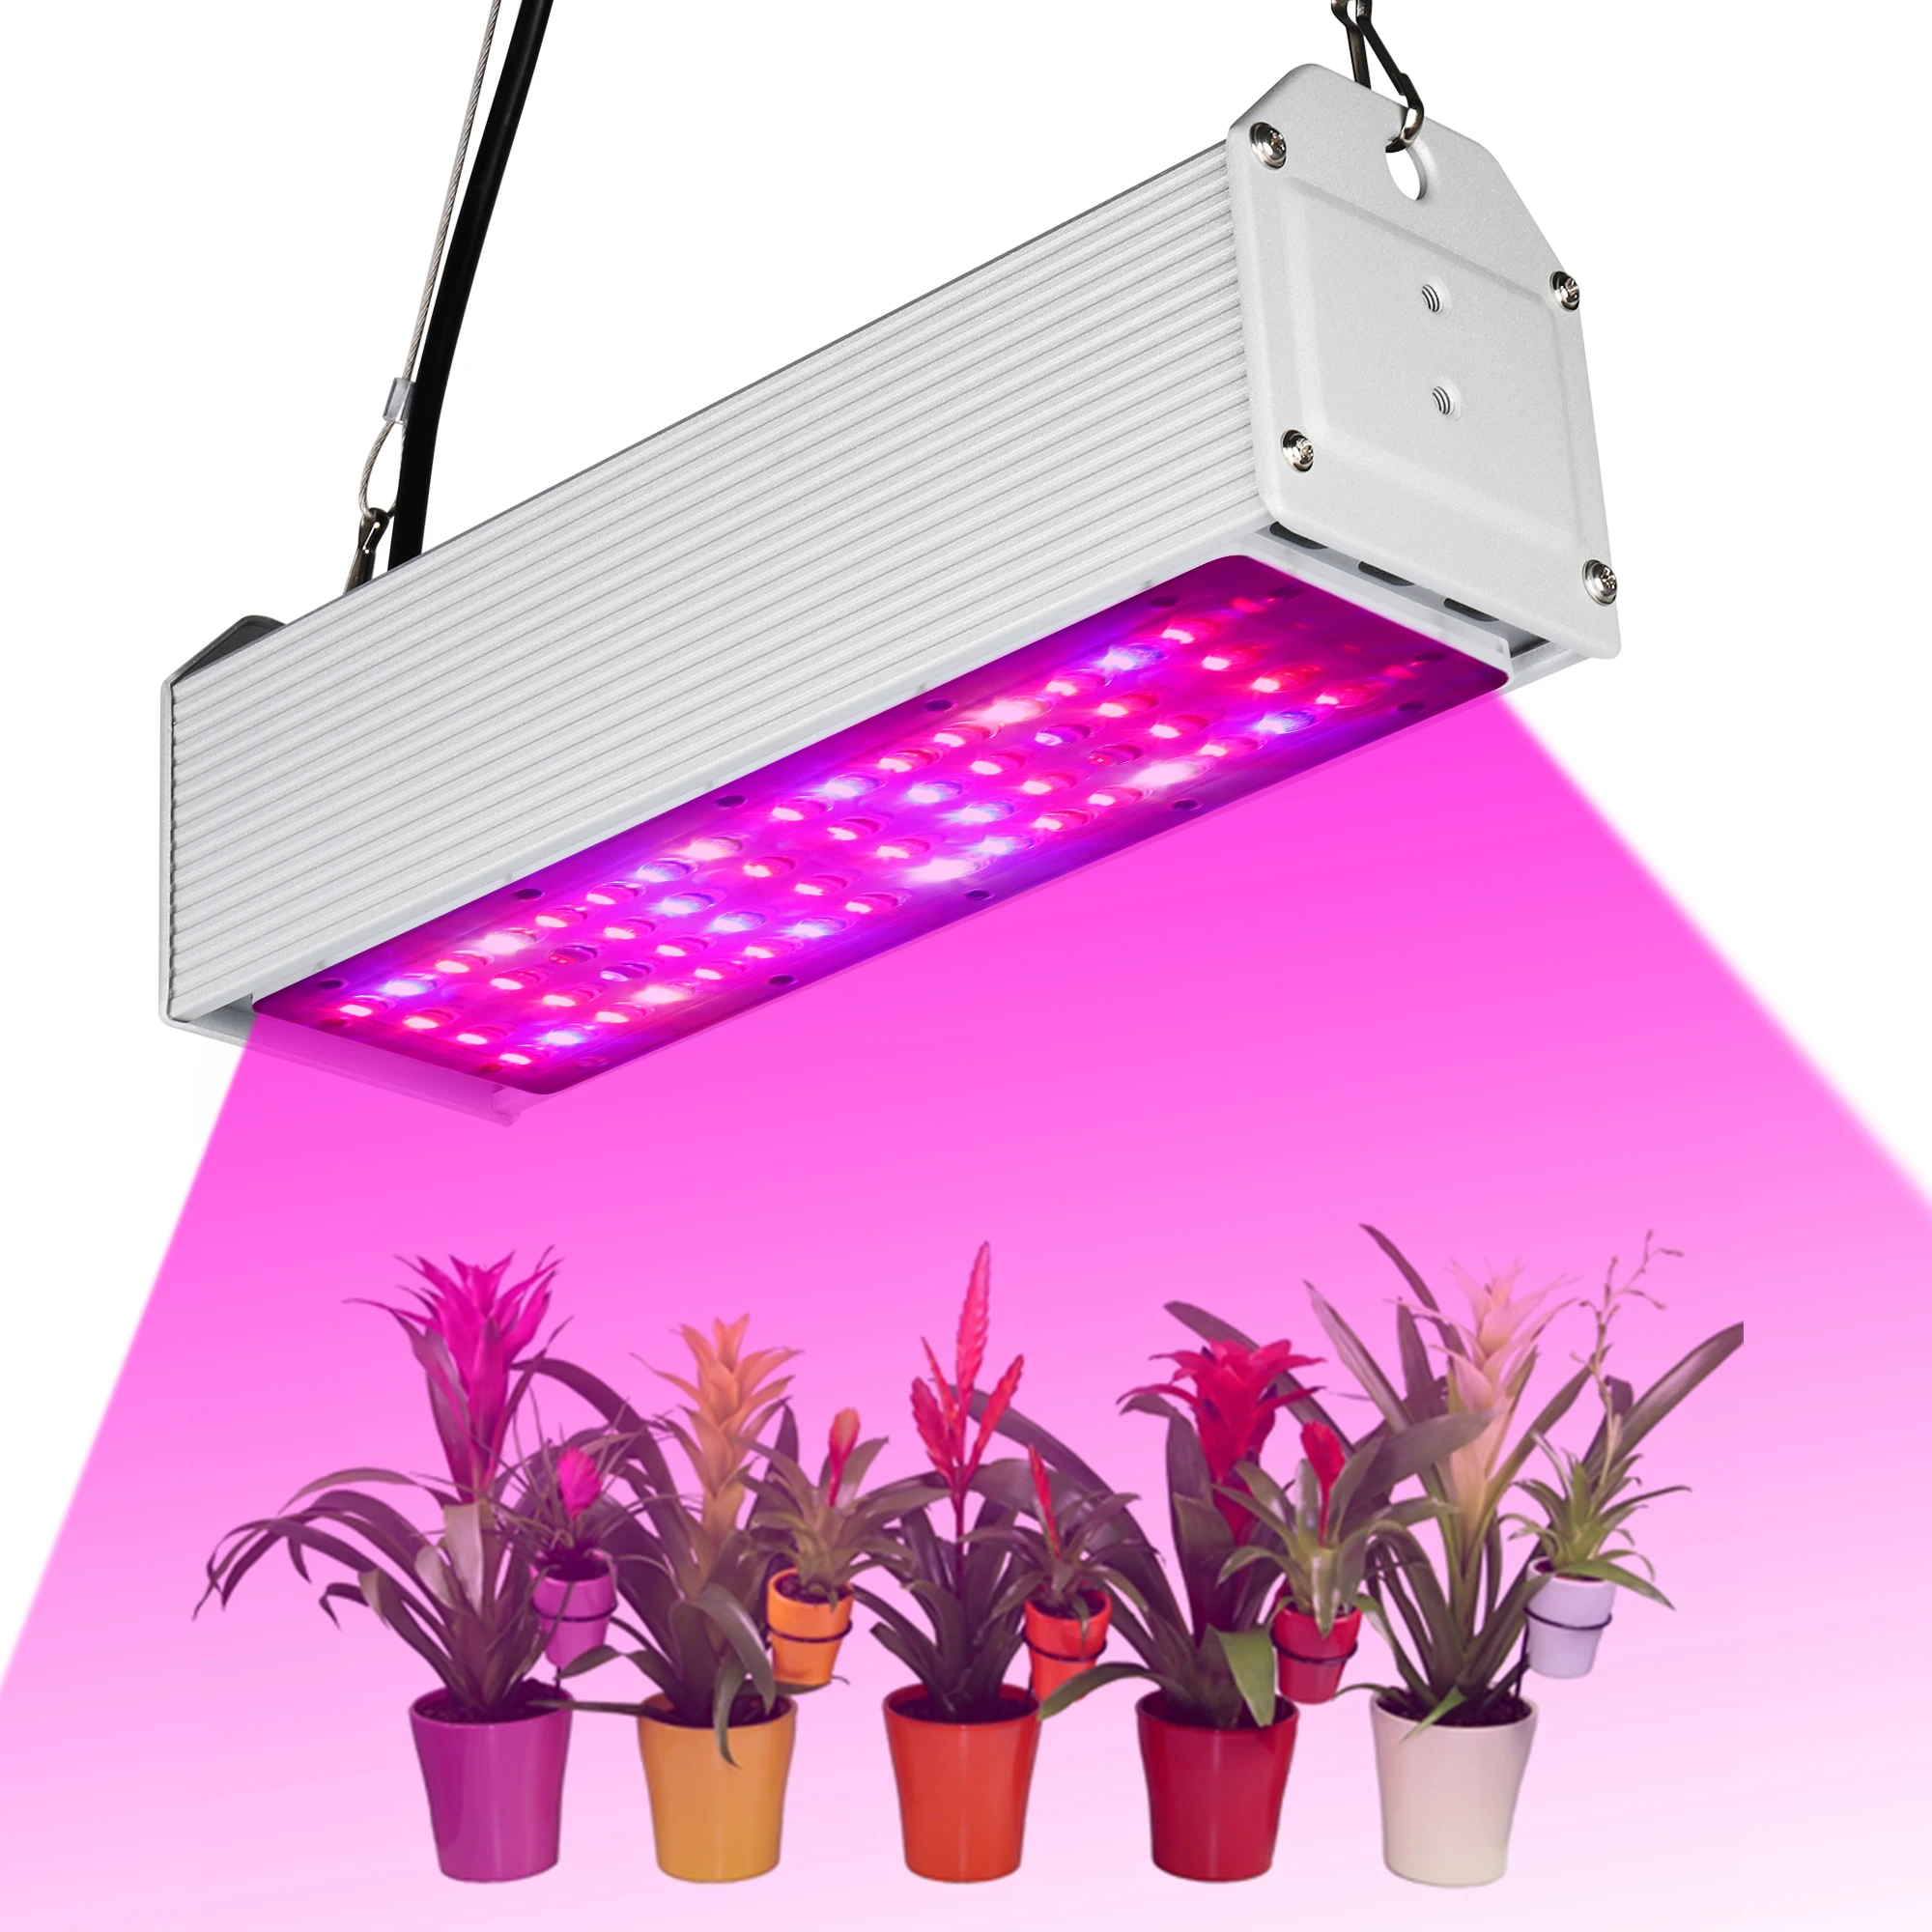 150W 300W LED Grow Light Full Spectrum Fitolamp Plant Growth Light for Indoor Flowers Hydroponics Vegs Greenhouse Grow Tent